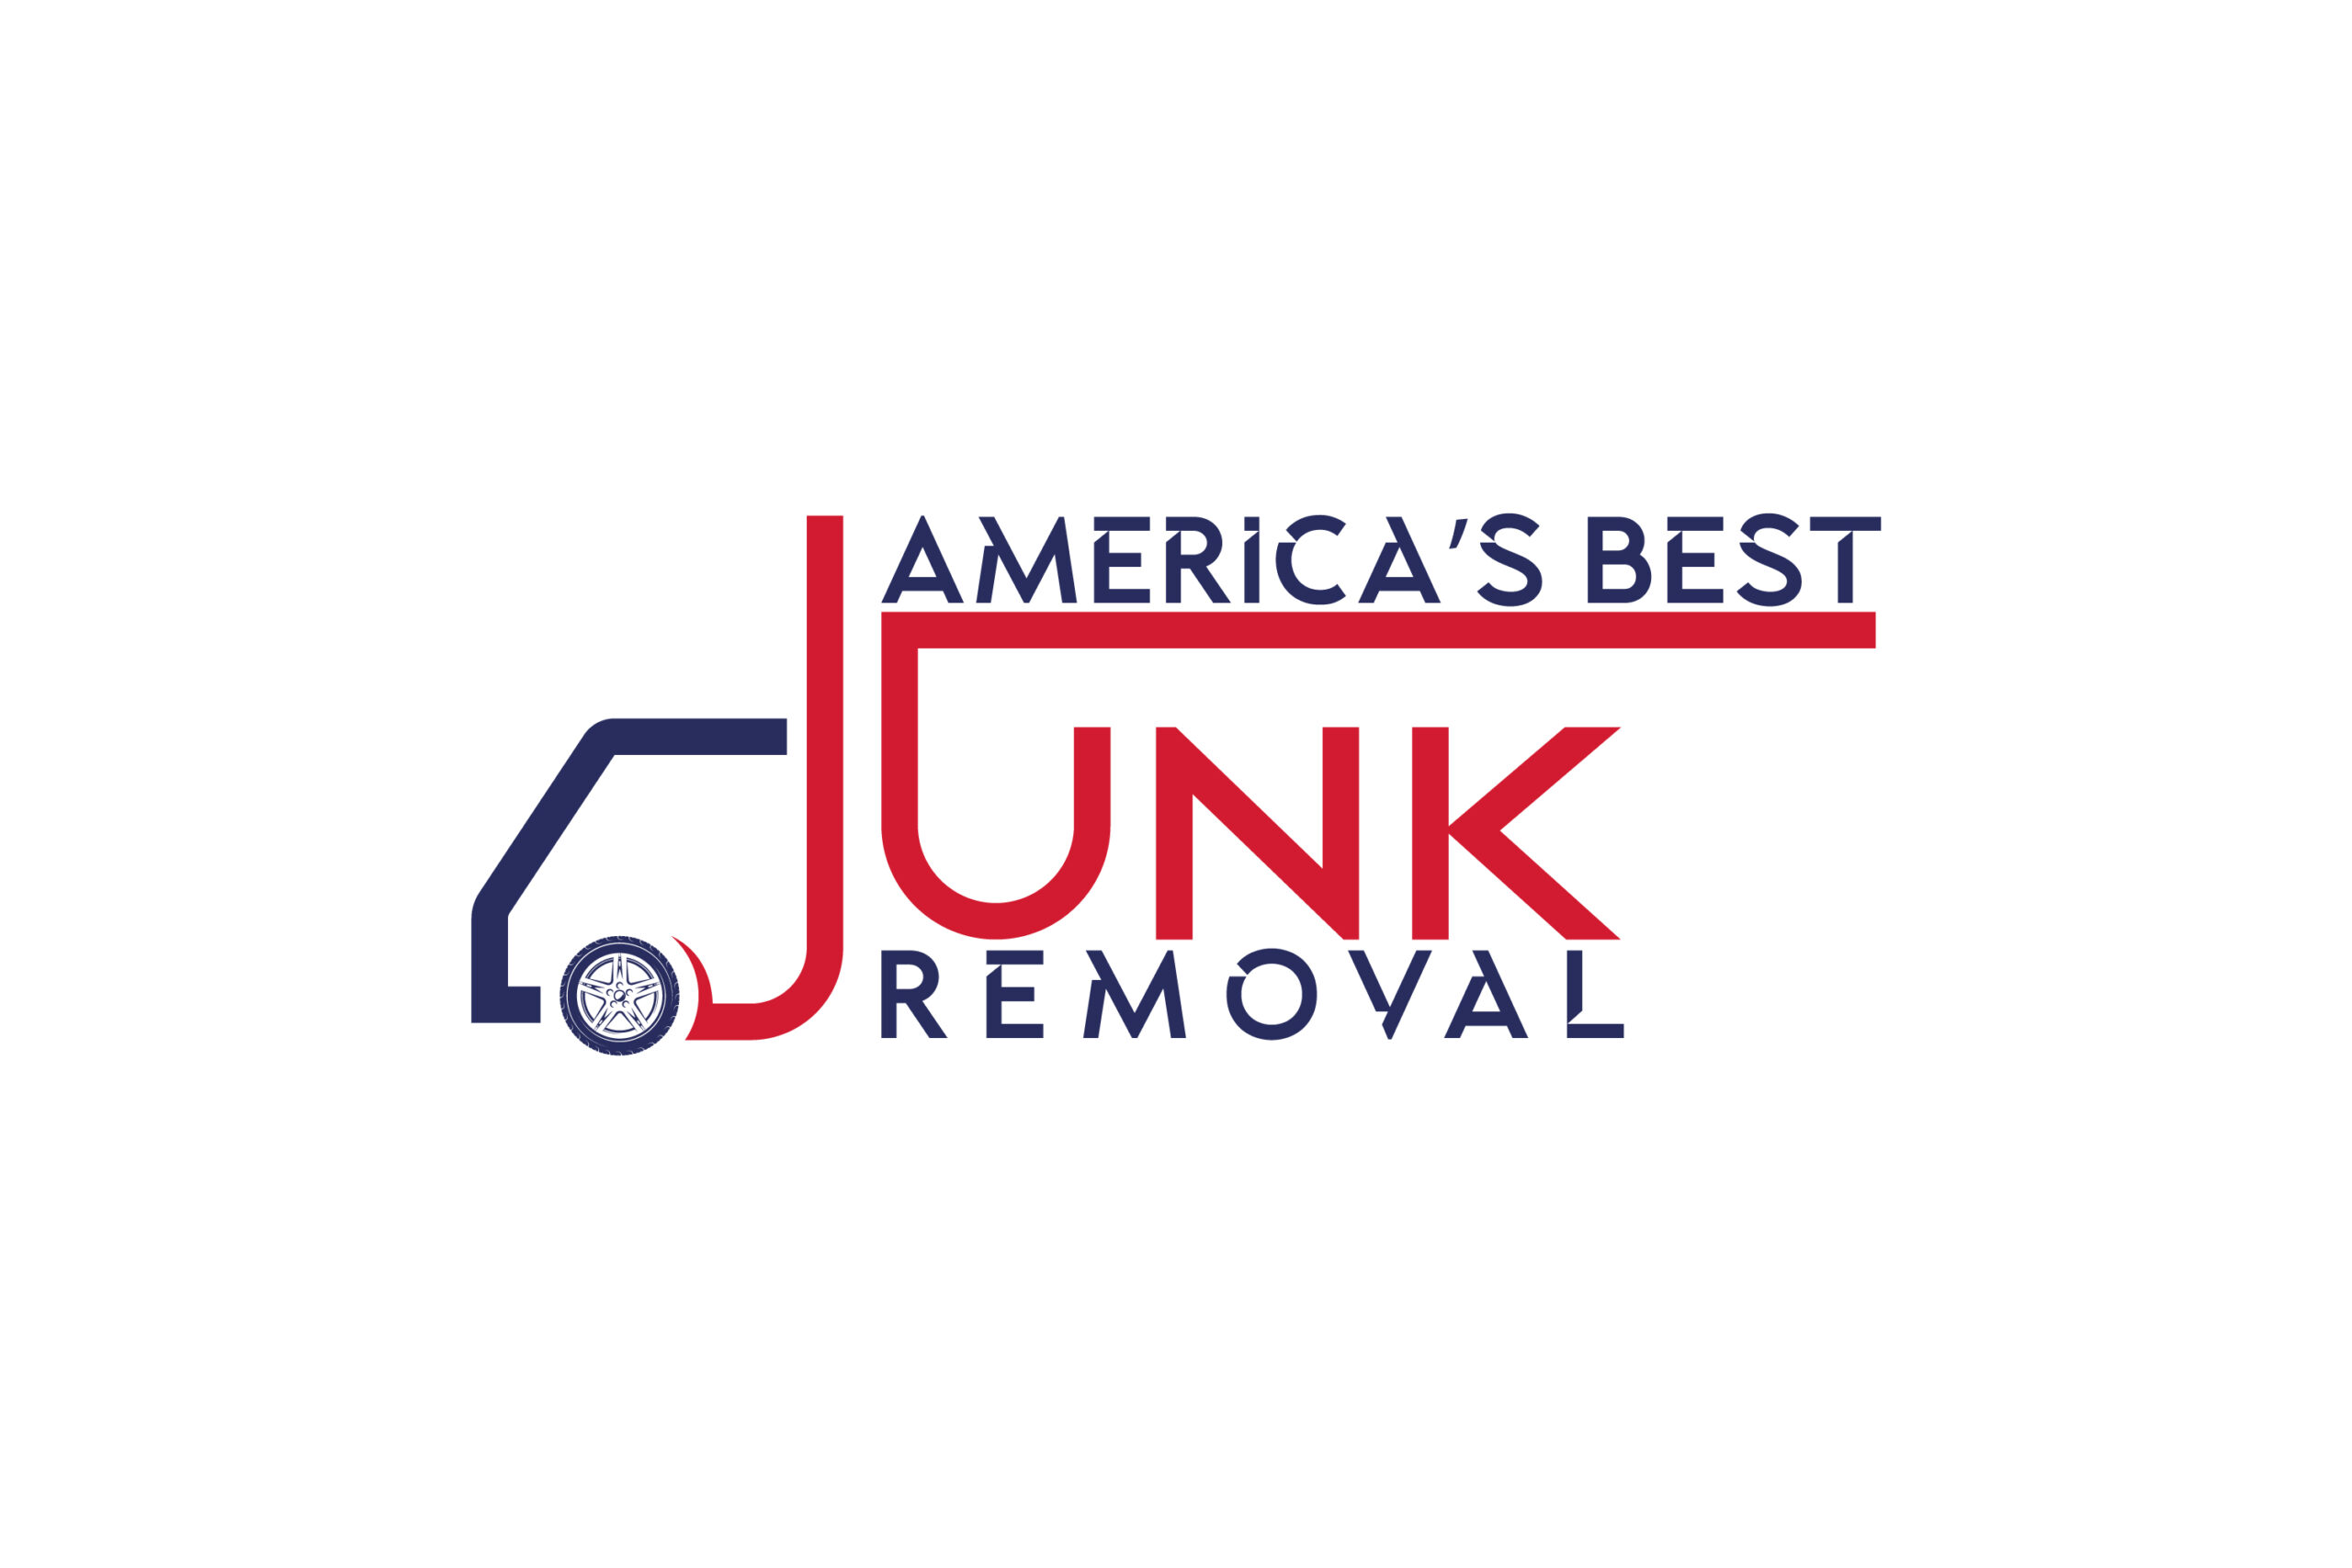 America’s Best Junk Removal And Hauling